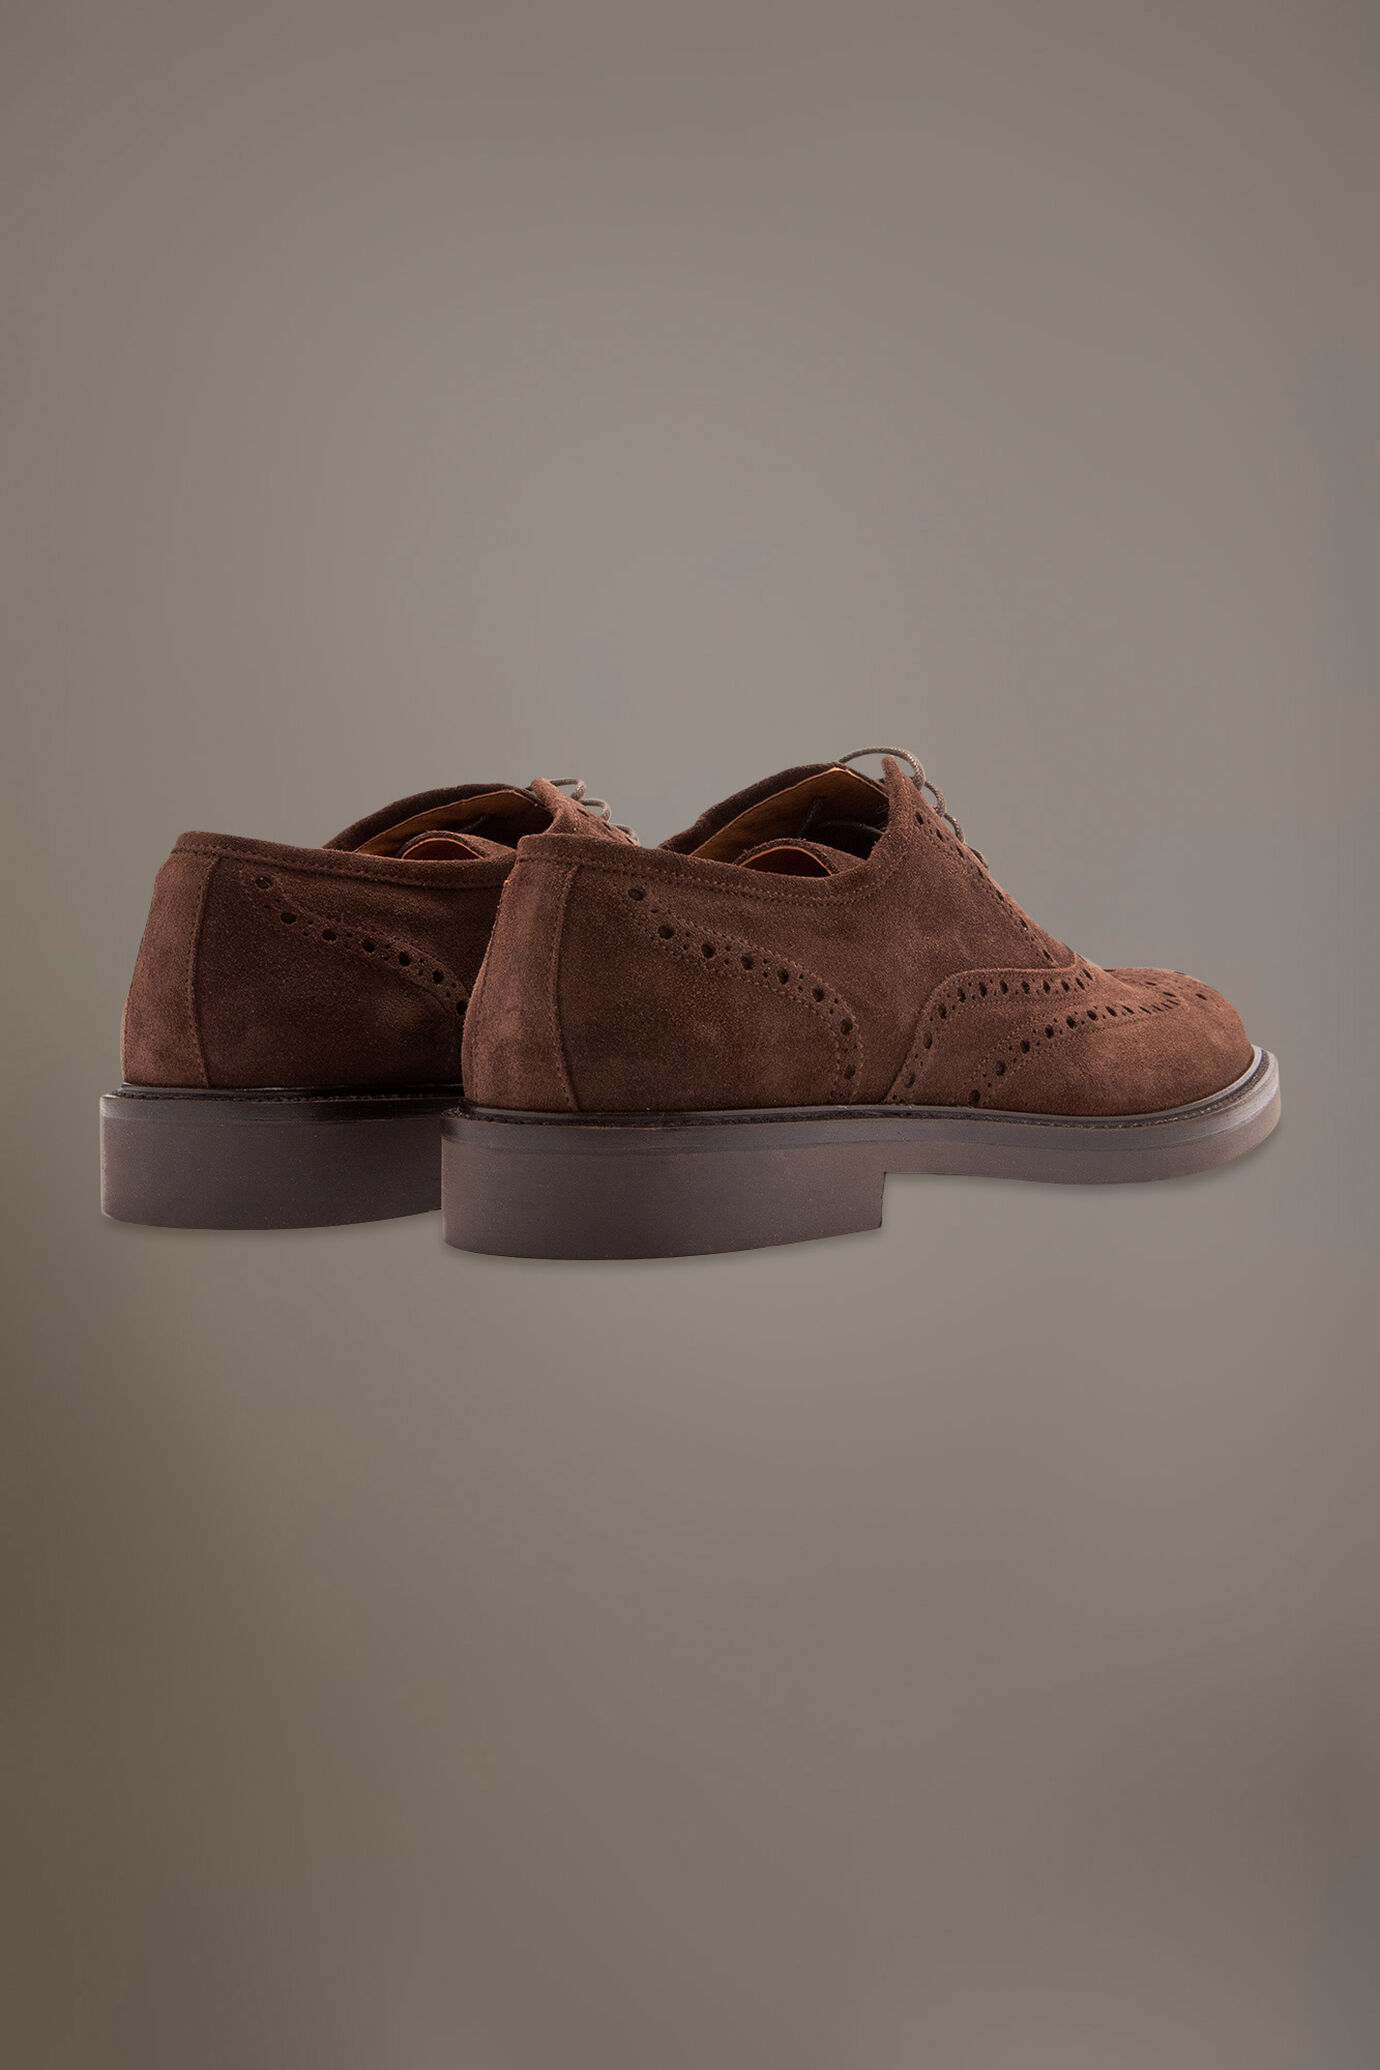 Oxford brouge shoes - 100% leather - suede image number 3